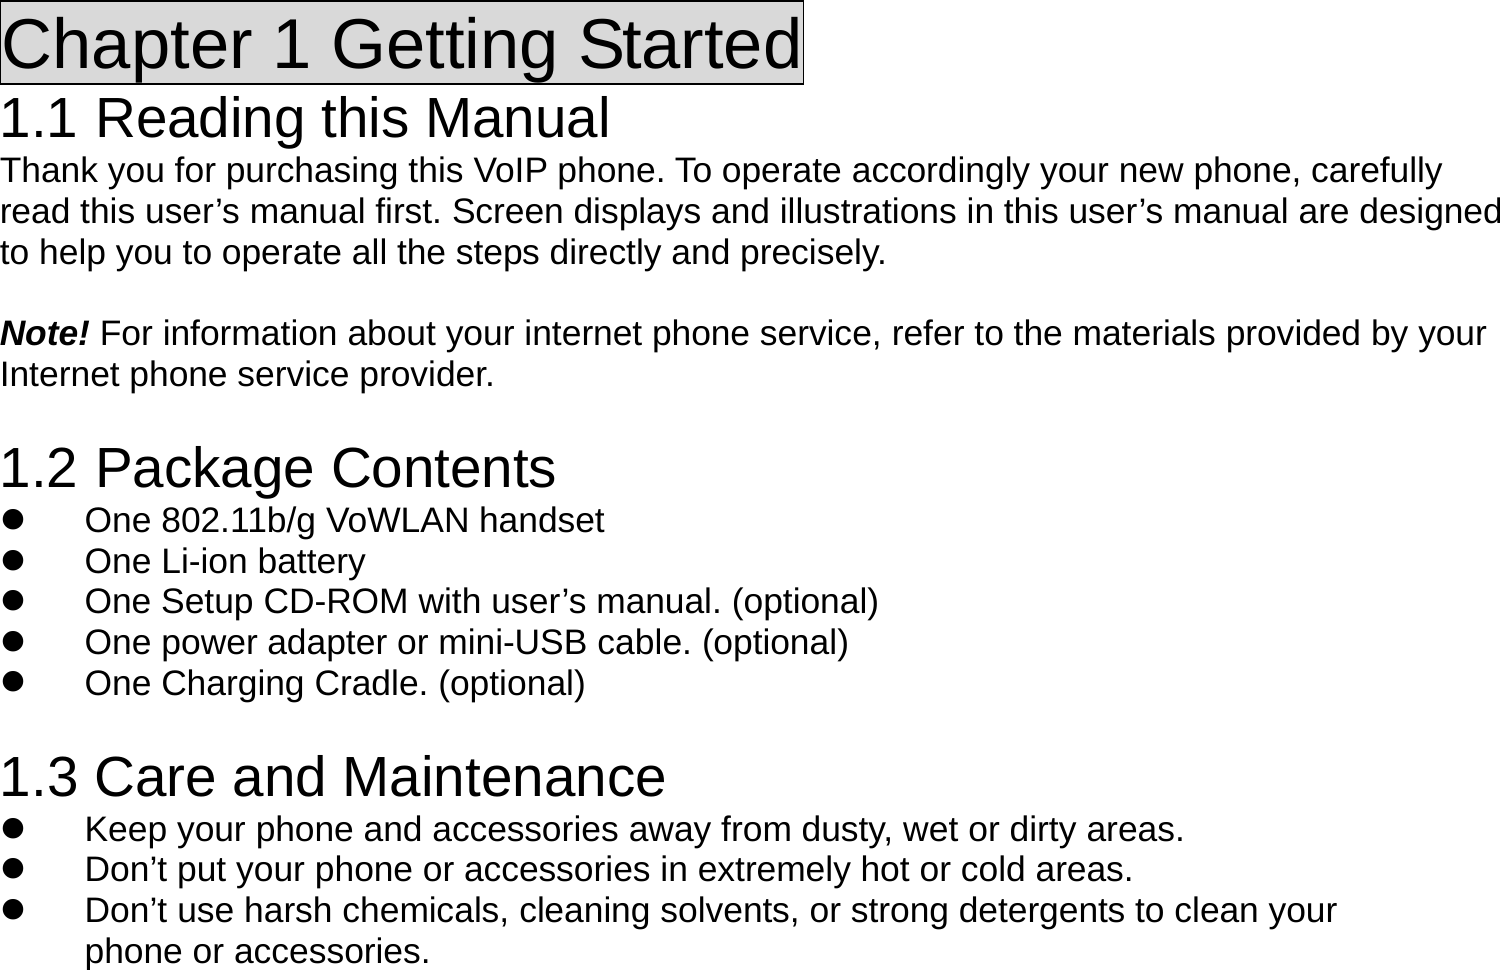 Chapter 1 Getting Started 1.1 Reading this Manual Thank you for purchasing this VoIP phone. To operate accordingly your new phone, carefully read this user’s manual first. Screen displays and illustrations in this user’s manual are designed to help you to operate all the steps directly and precisely.  Note! For information about your internet phone service, refer to the materials provided by your Internet phone service provider.  1.2 Package Contents   One 802.11b/g VoWLAN handset   One Li-ion battery   One Setup CD-ROM with user’s manual. (optional)   One power adapter or mini-USB cable. (optional)   One Charging Cradle. (optional)  1.3 Care and Maintenance   Keep your phone and accessories away from dusty, wet or dirty areas.   Don’t put your phone or accessories in extremely hot or cold areas.   Don’t use harsh chemicals, cleaning solvents, or strong detergents to clean your phone or accessories. 